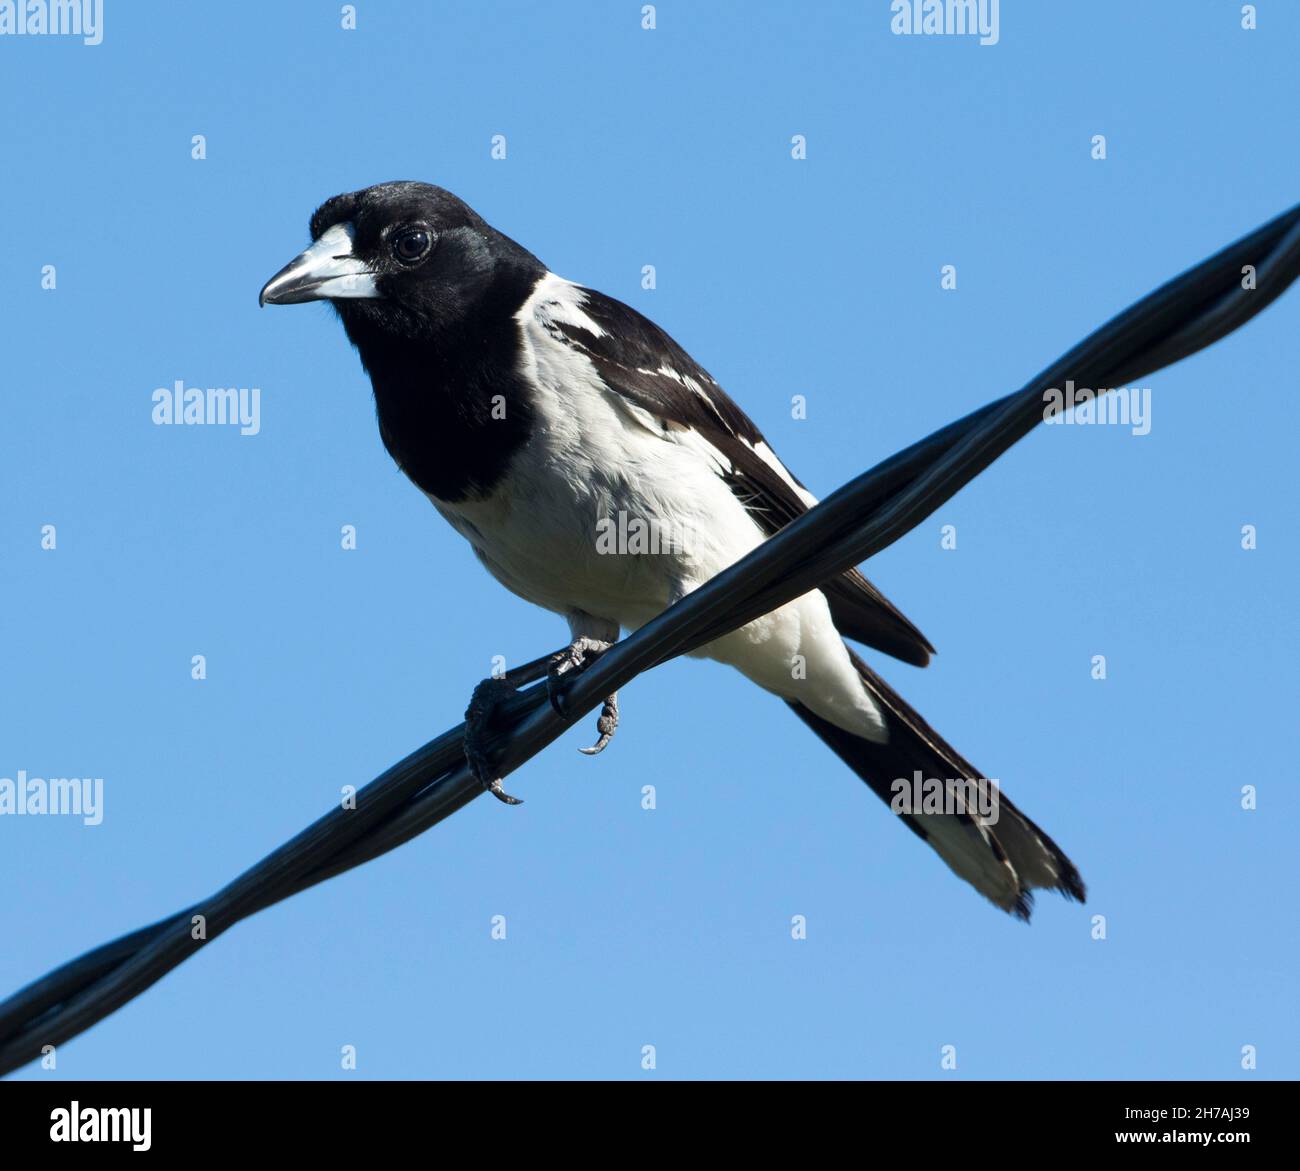 Pied Butcherbird, Cracticus nigrogularis, perched on a power cable against a blue sky in Australia Stock Photo